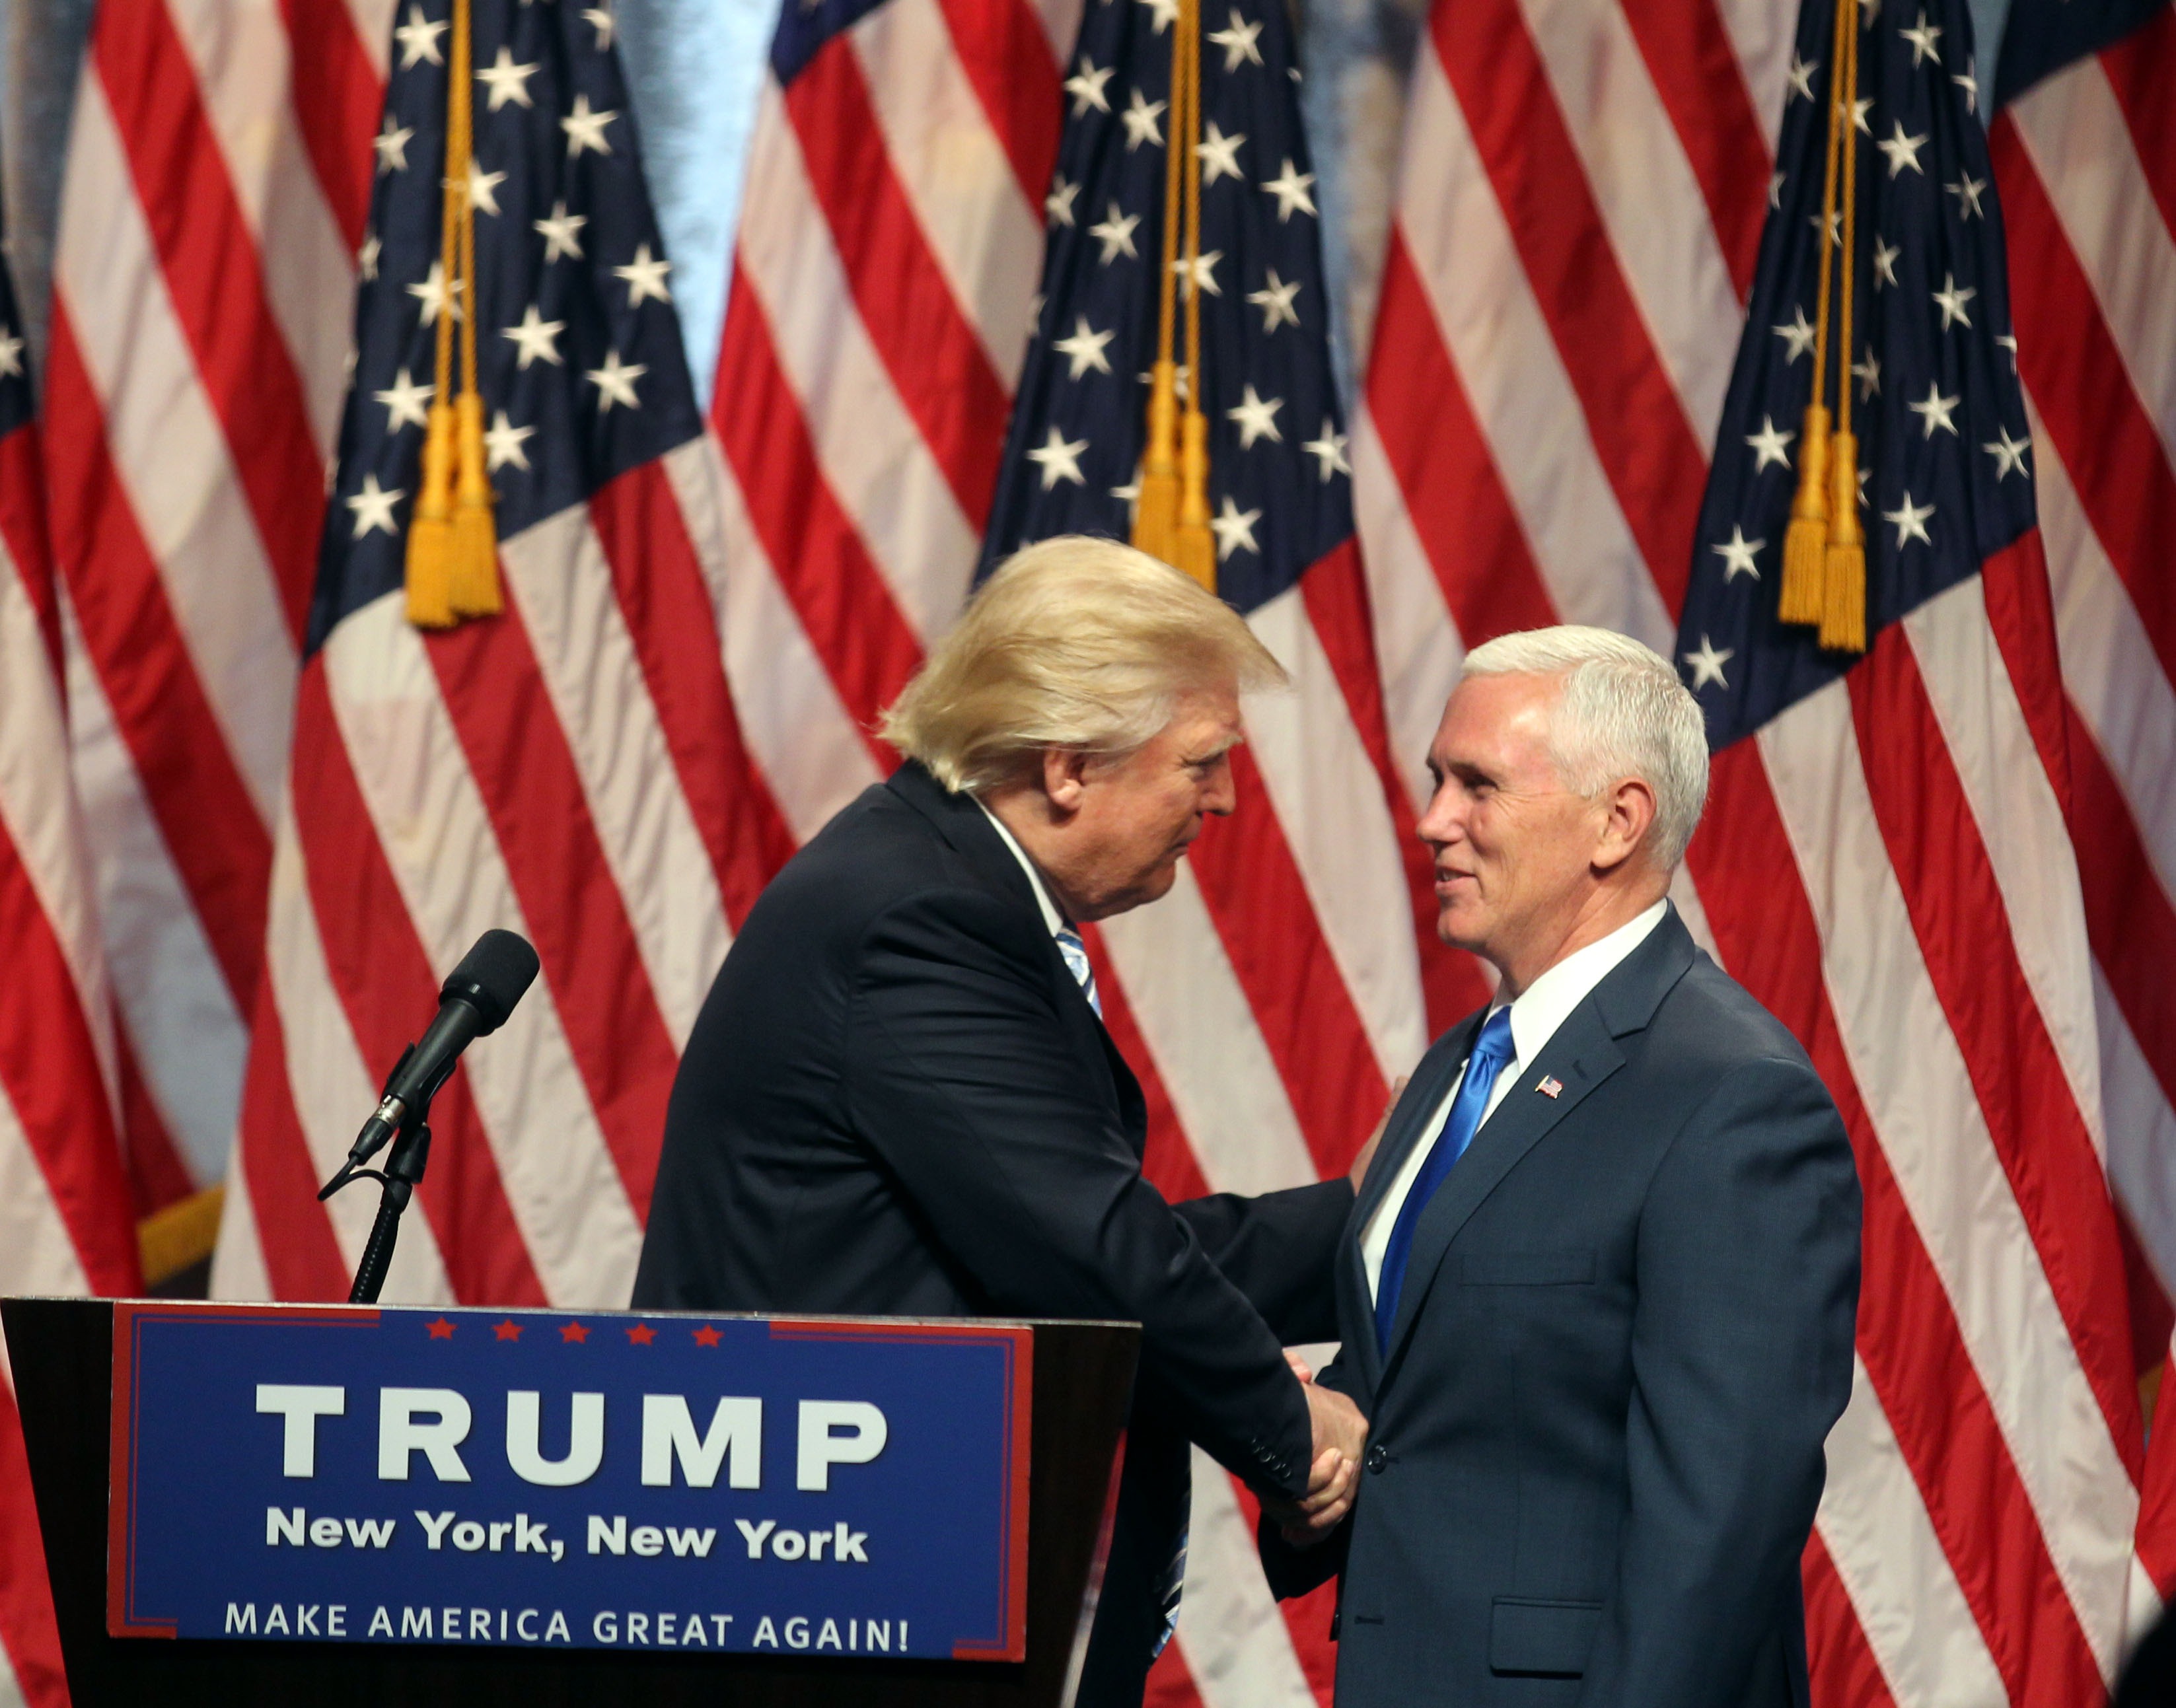 Donald Trump introduces Indiana Gov. Mike Pence as his vice presidential running mate at a press conference at the Hilton Hotel on July 16, 2016 in New York City. (Steve Sands—WireImage/Getty Images)